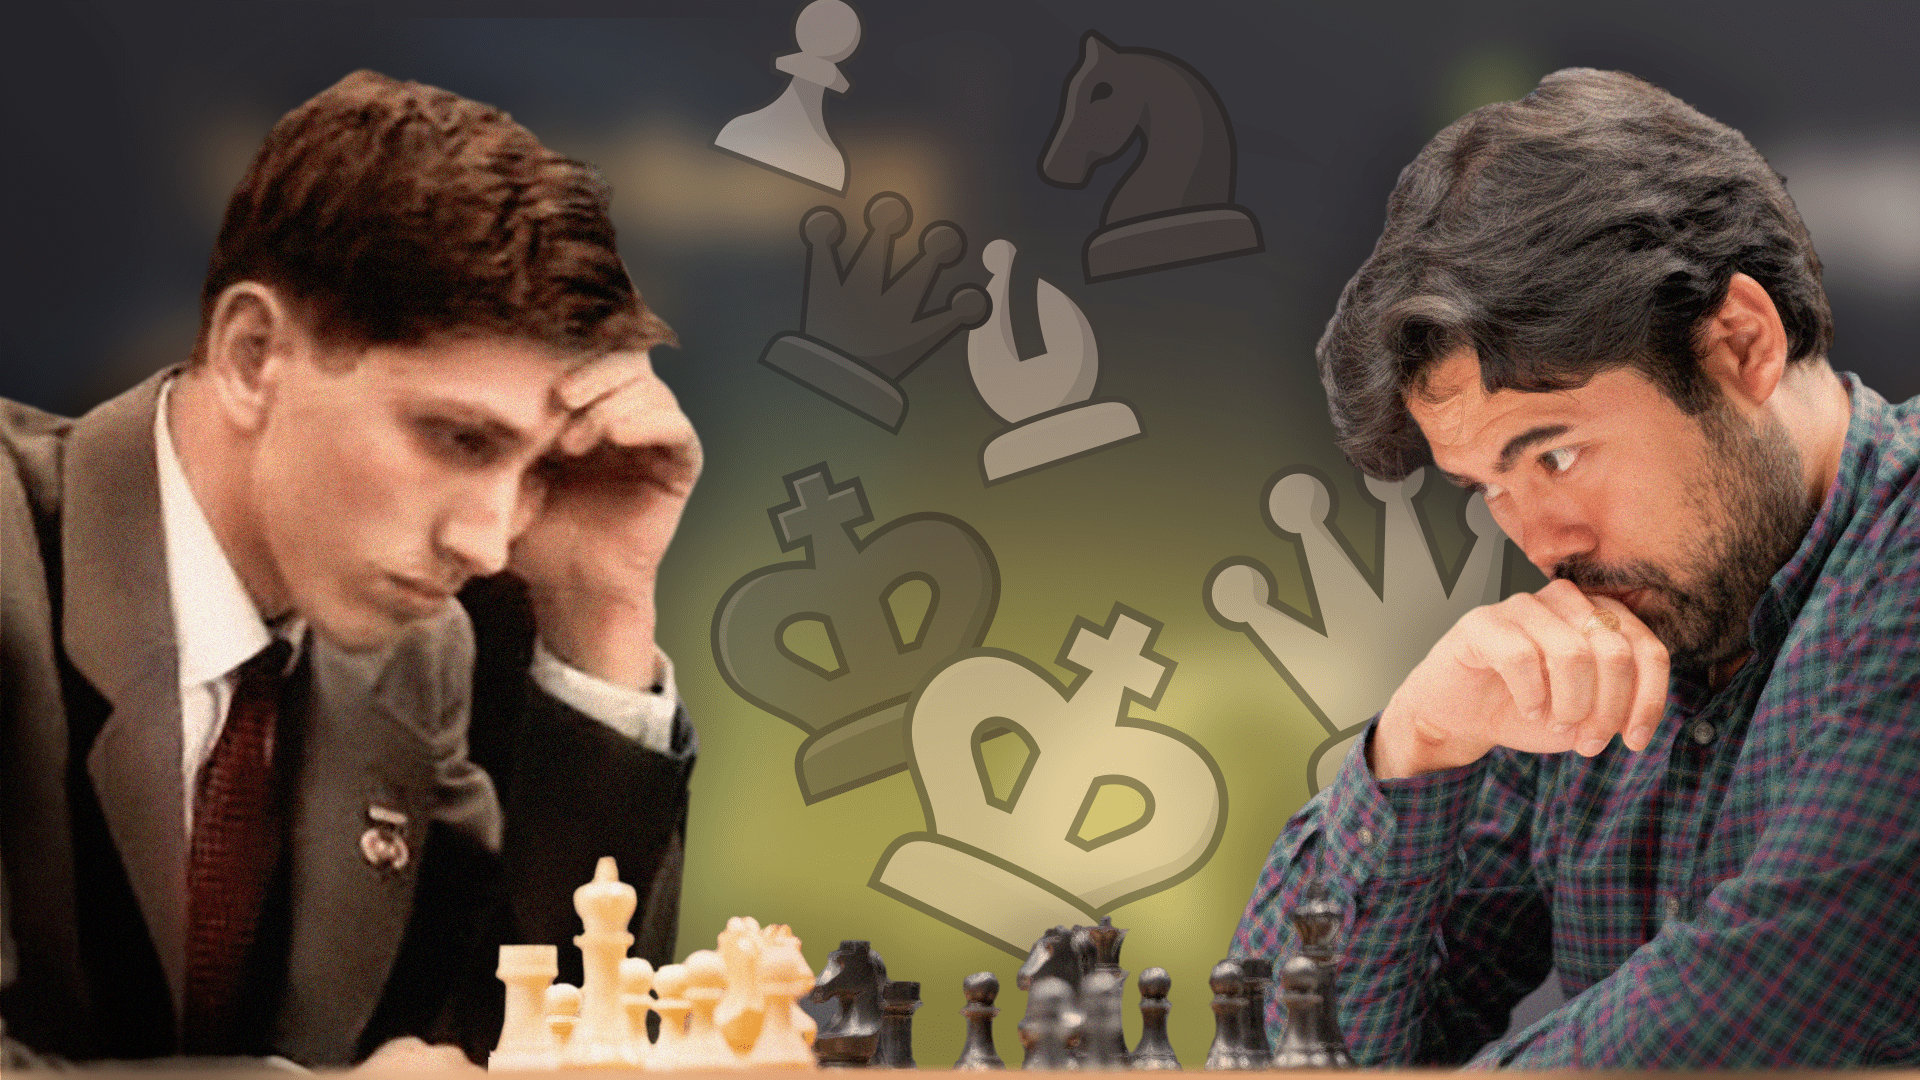 Magnus Carlsen wins a very important game against Anish Giri - Chess Forums  